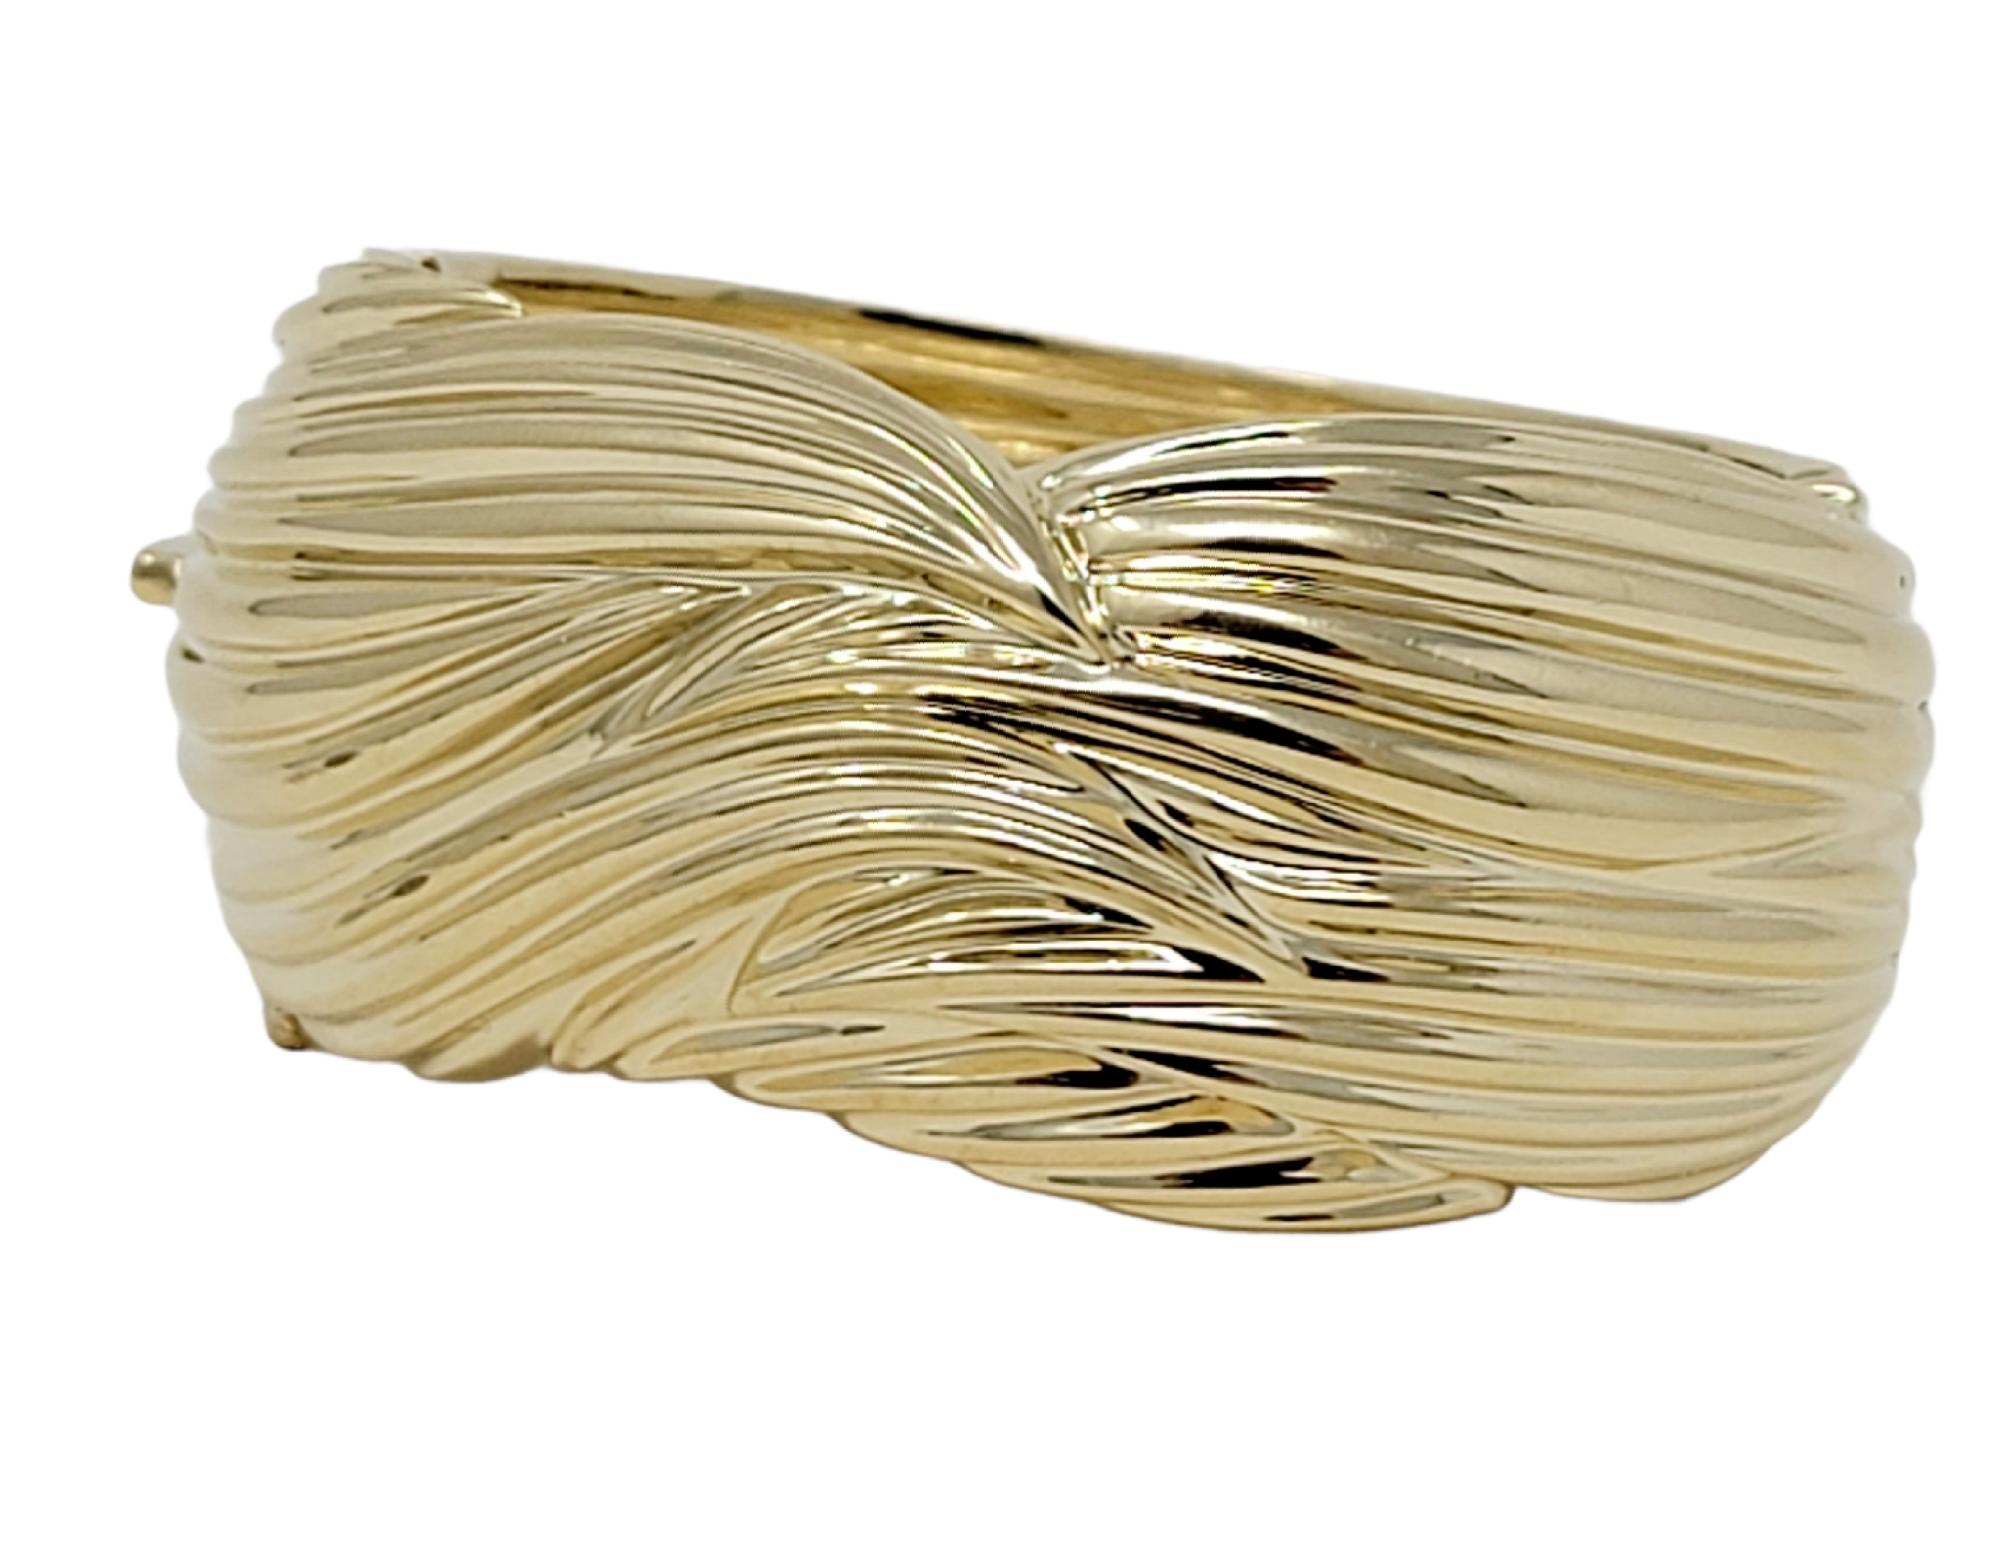 Bold, contemporary Sal Praschnik statement piece that fills the wrist with style. Elevate your common cuff style into this unique statement piece! Featuring a wide, polished 14 karat yellow gold construction with a textured design throughout the